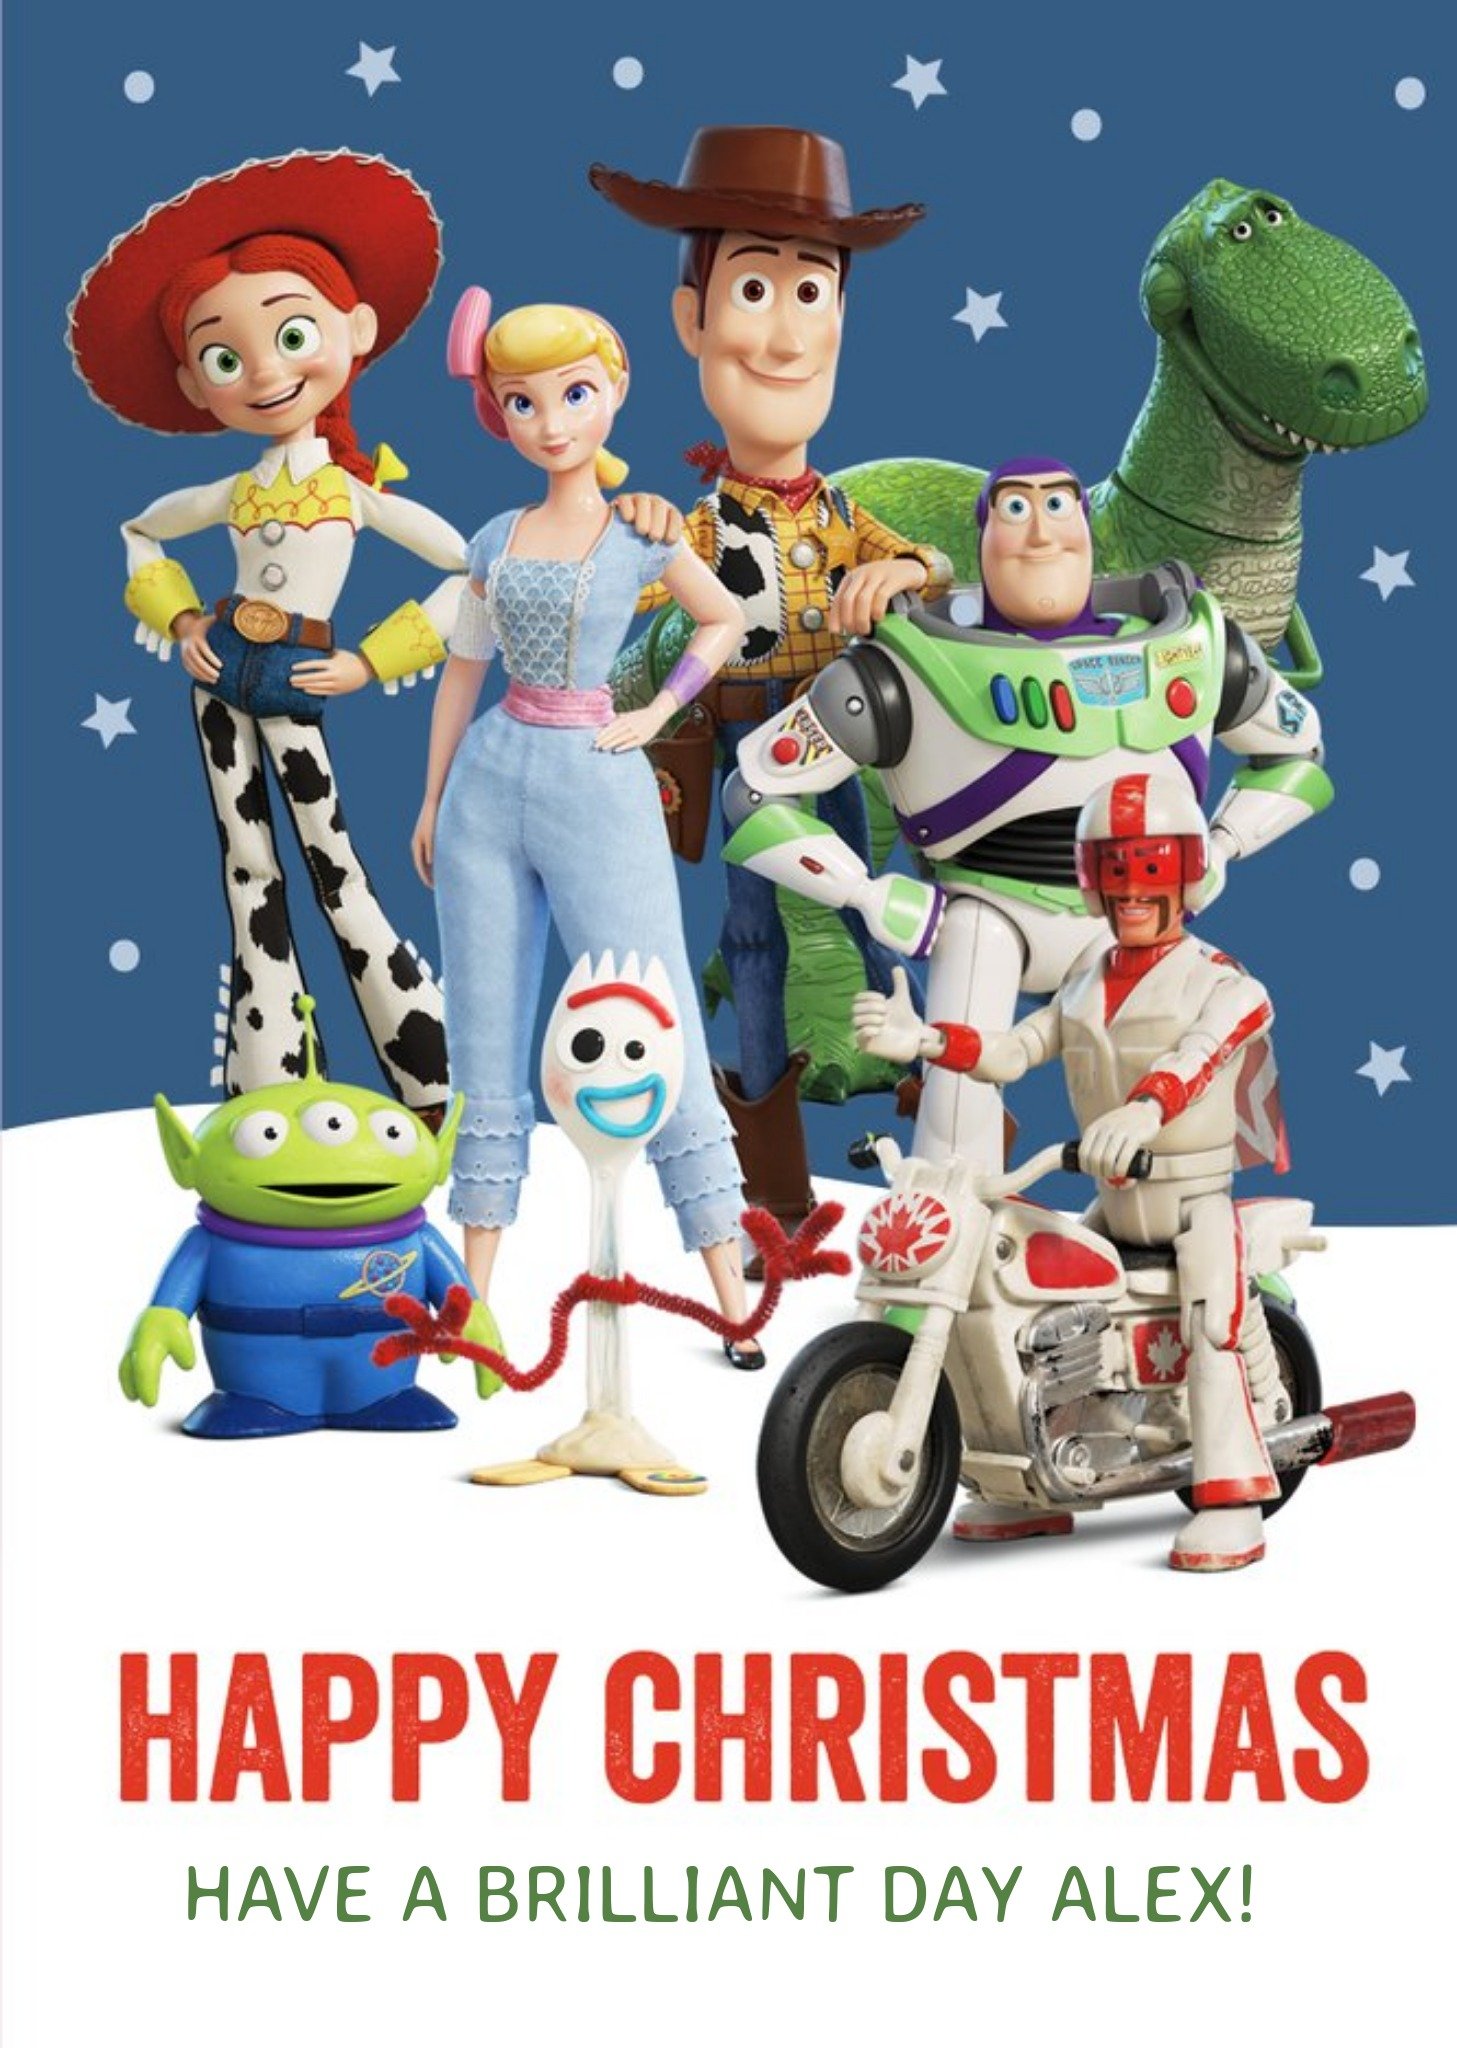 Disney Toy Story 4 Characters Christmas Cards Happy Christmas, Large